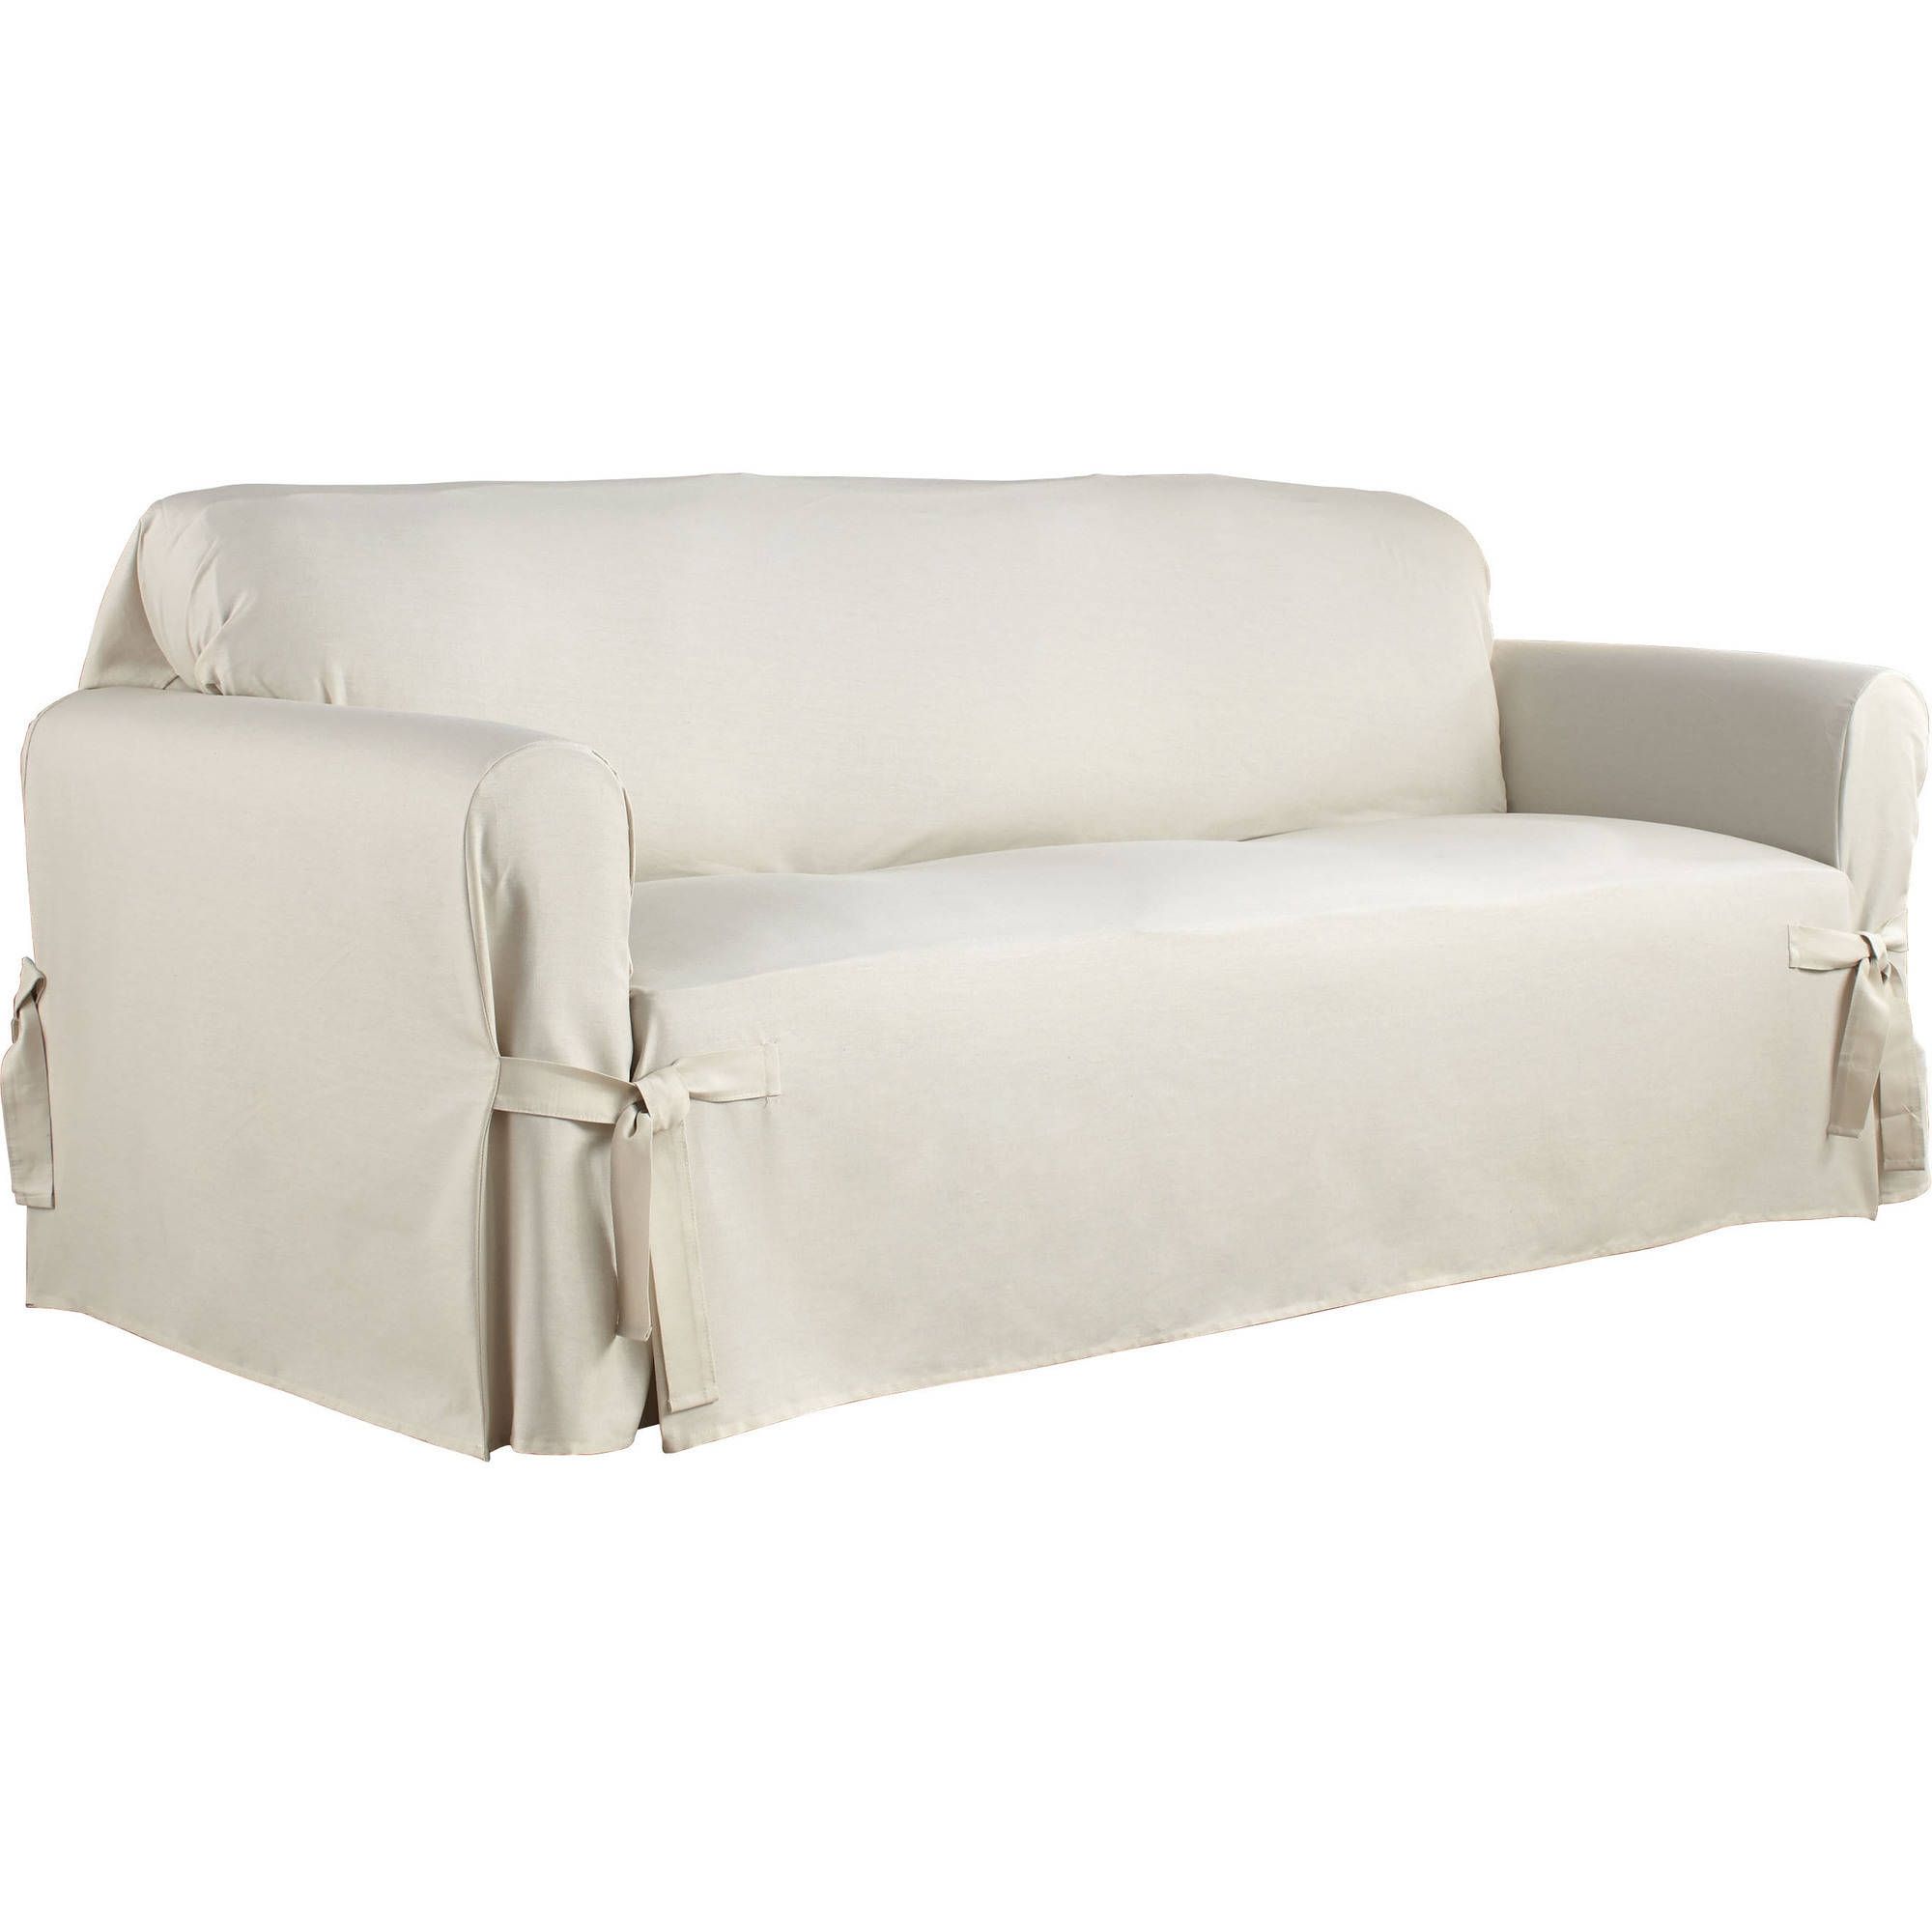 Serta Relaxed Fit Duck Furniture Slipcover Sofa 1 Piece Box Inside Slipcovers For Sofas And Chairs (View 12 of 15)